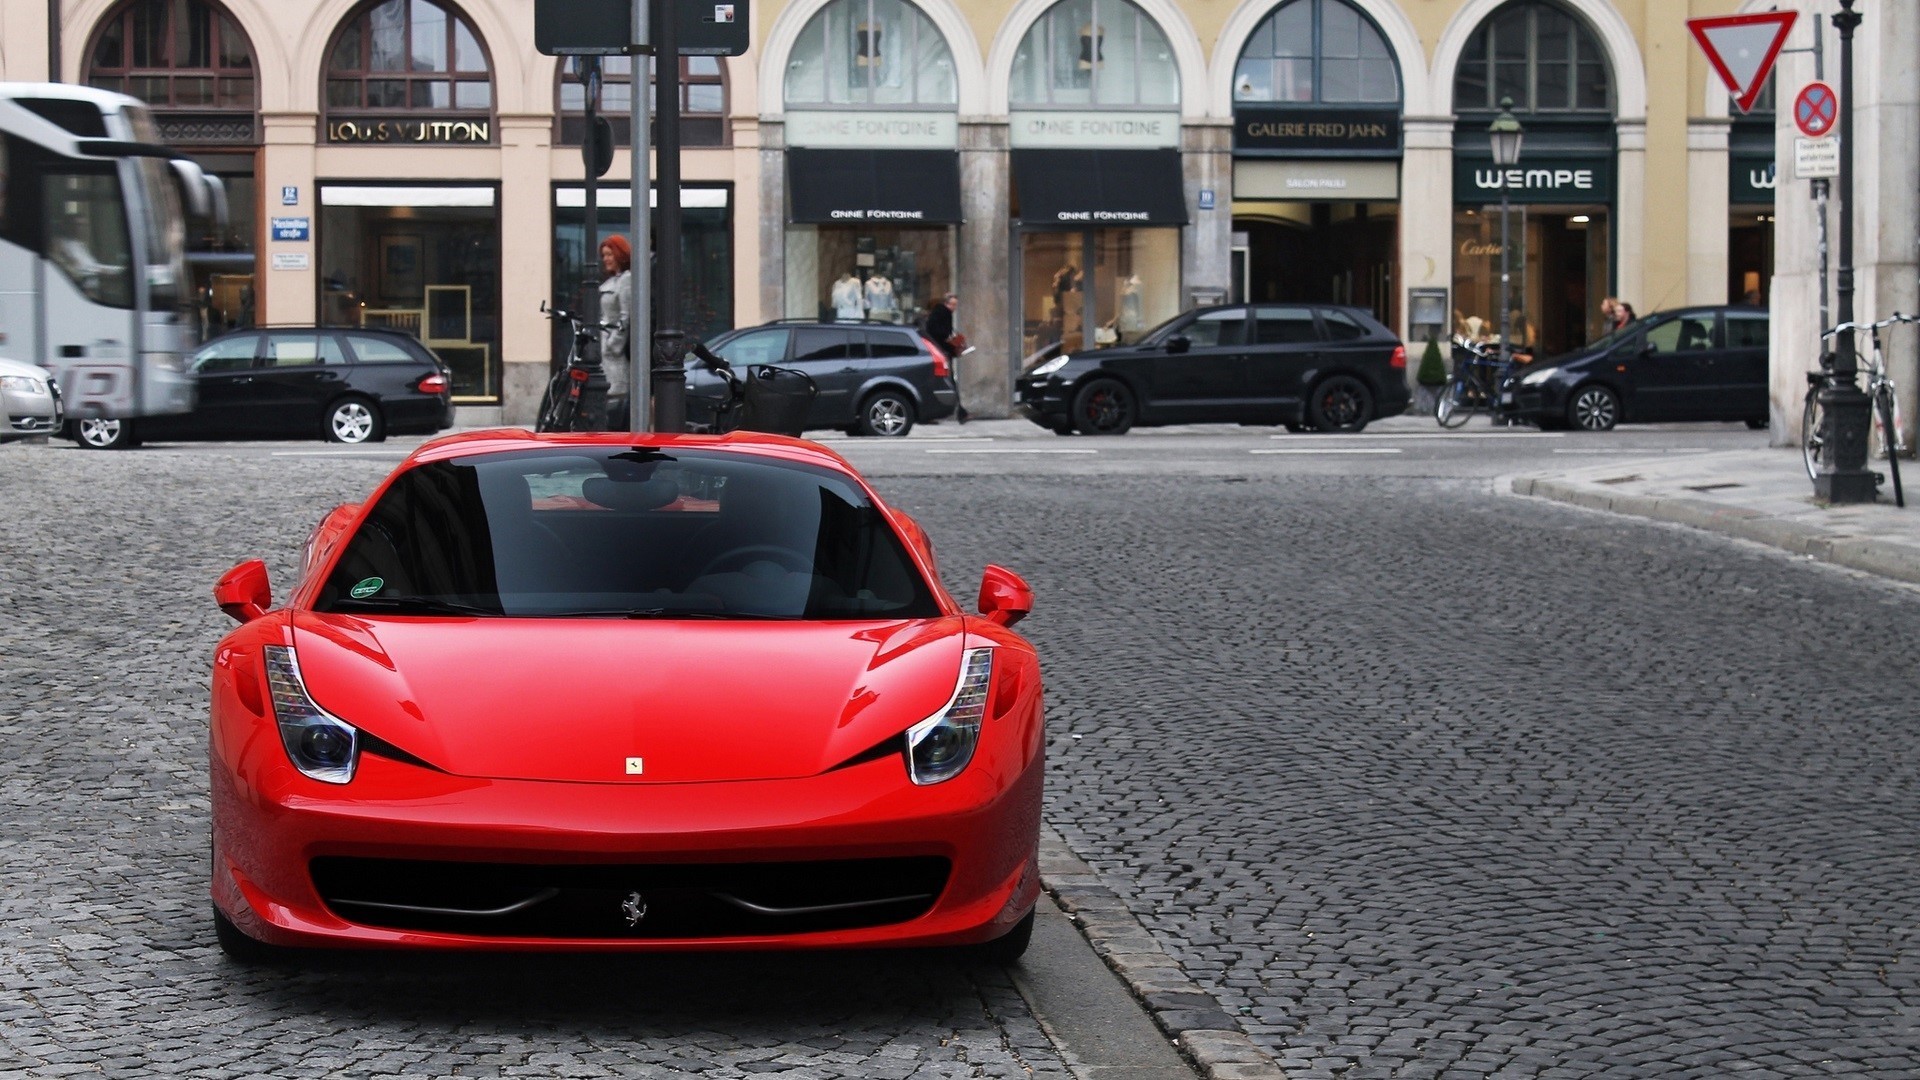 1920x1080 Red Ferrari 458 Italia Car Nice Wallpapers HD Backgrounds Free Download